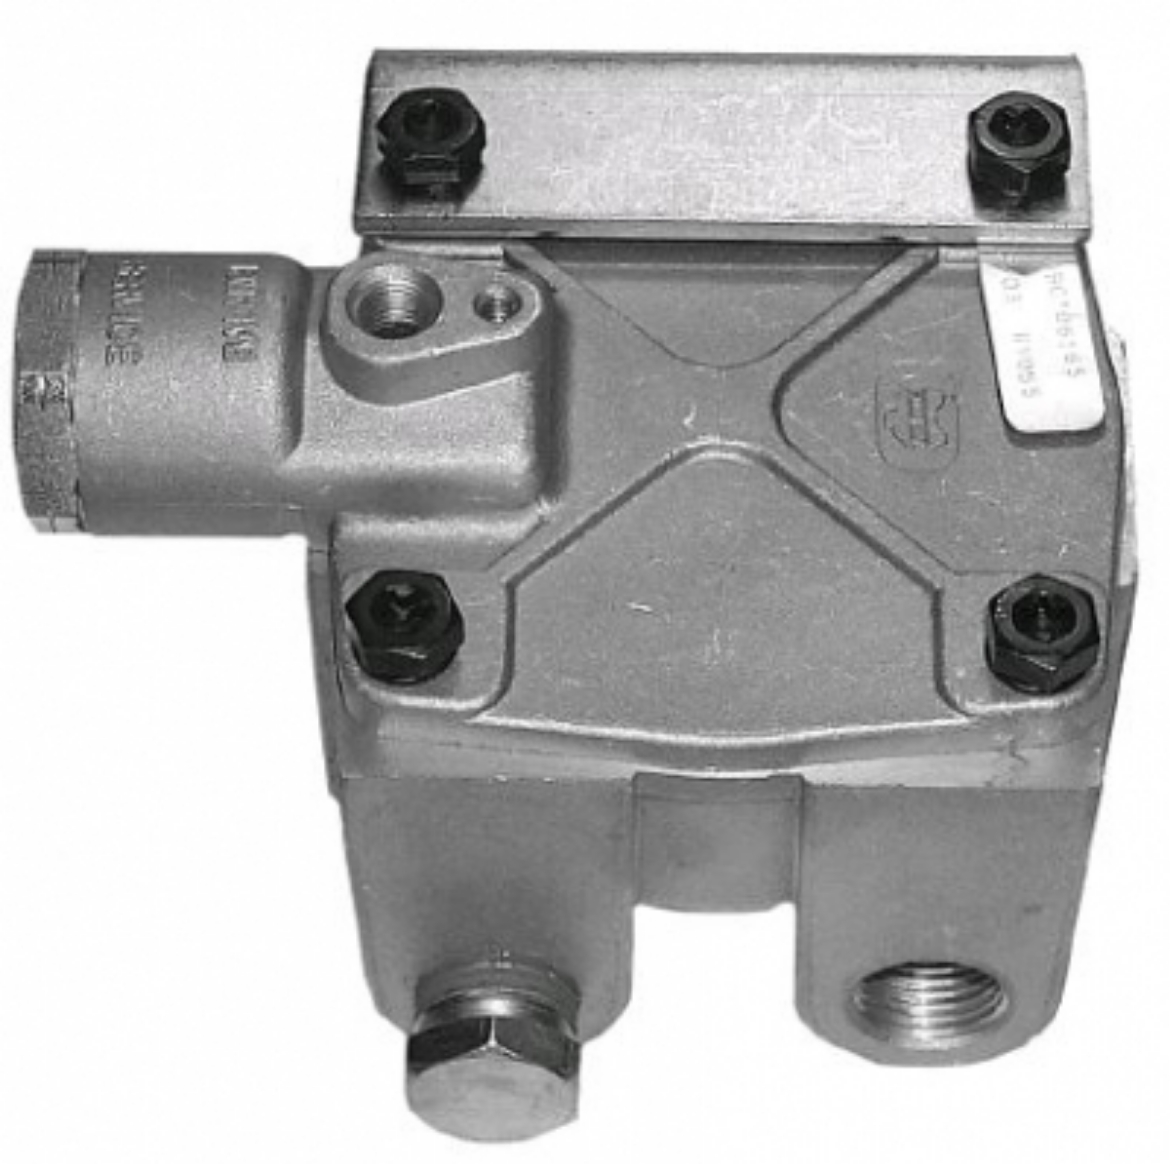 Picture of RELAY VALVE R14H STYLE 4PSI CRACK PRESSURE WITH BRACKET
(REPLACES 103010, 104146)